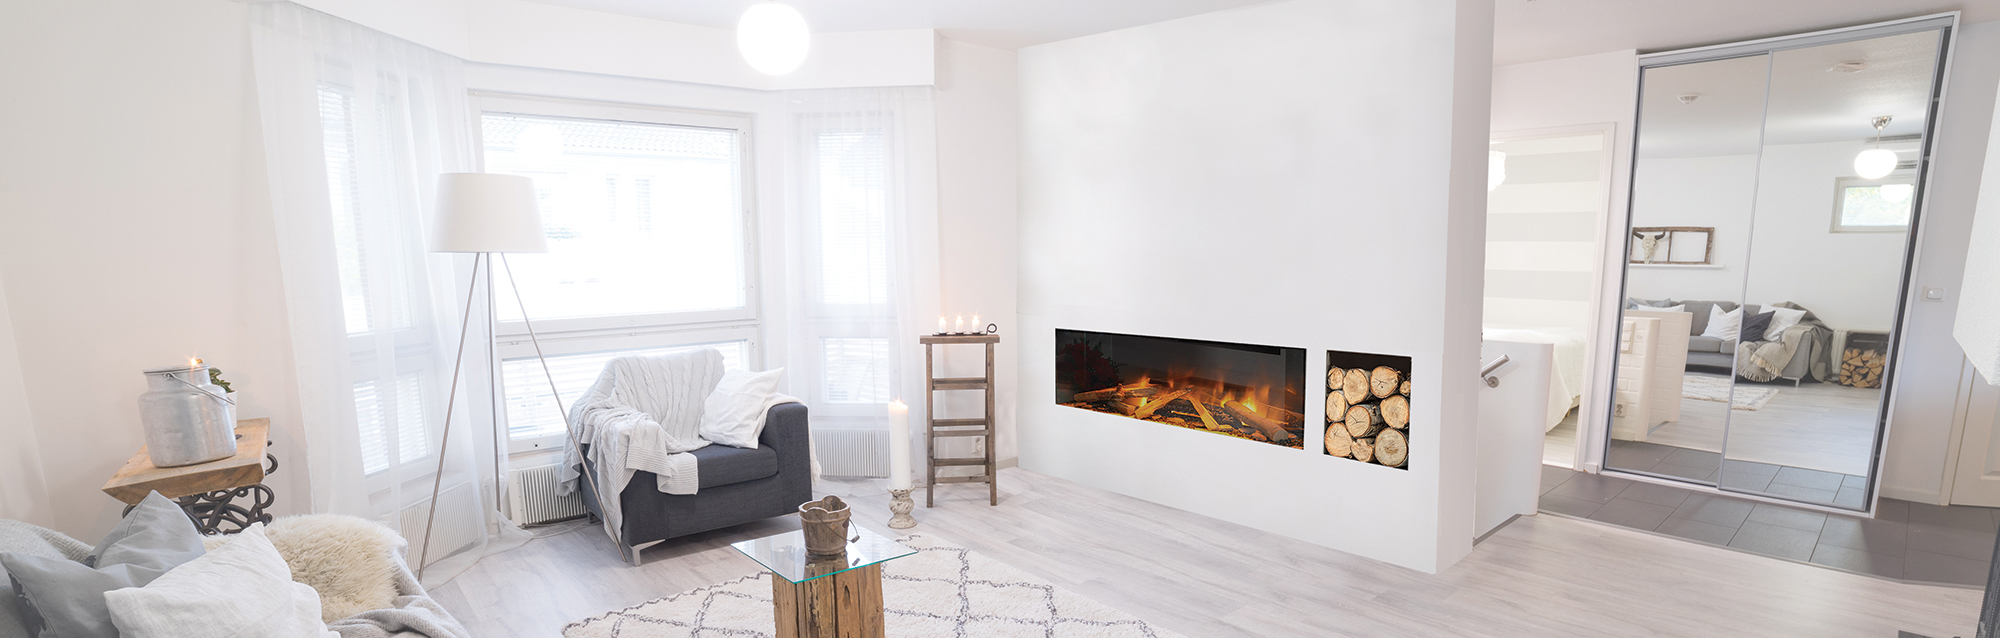 Fake Fireplaces Sale Beautiful Modern Electric Fireplaces Highly Efficient Elegance by